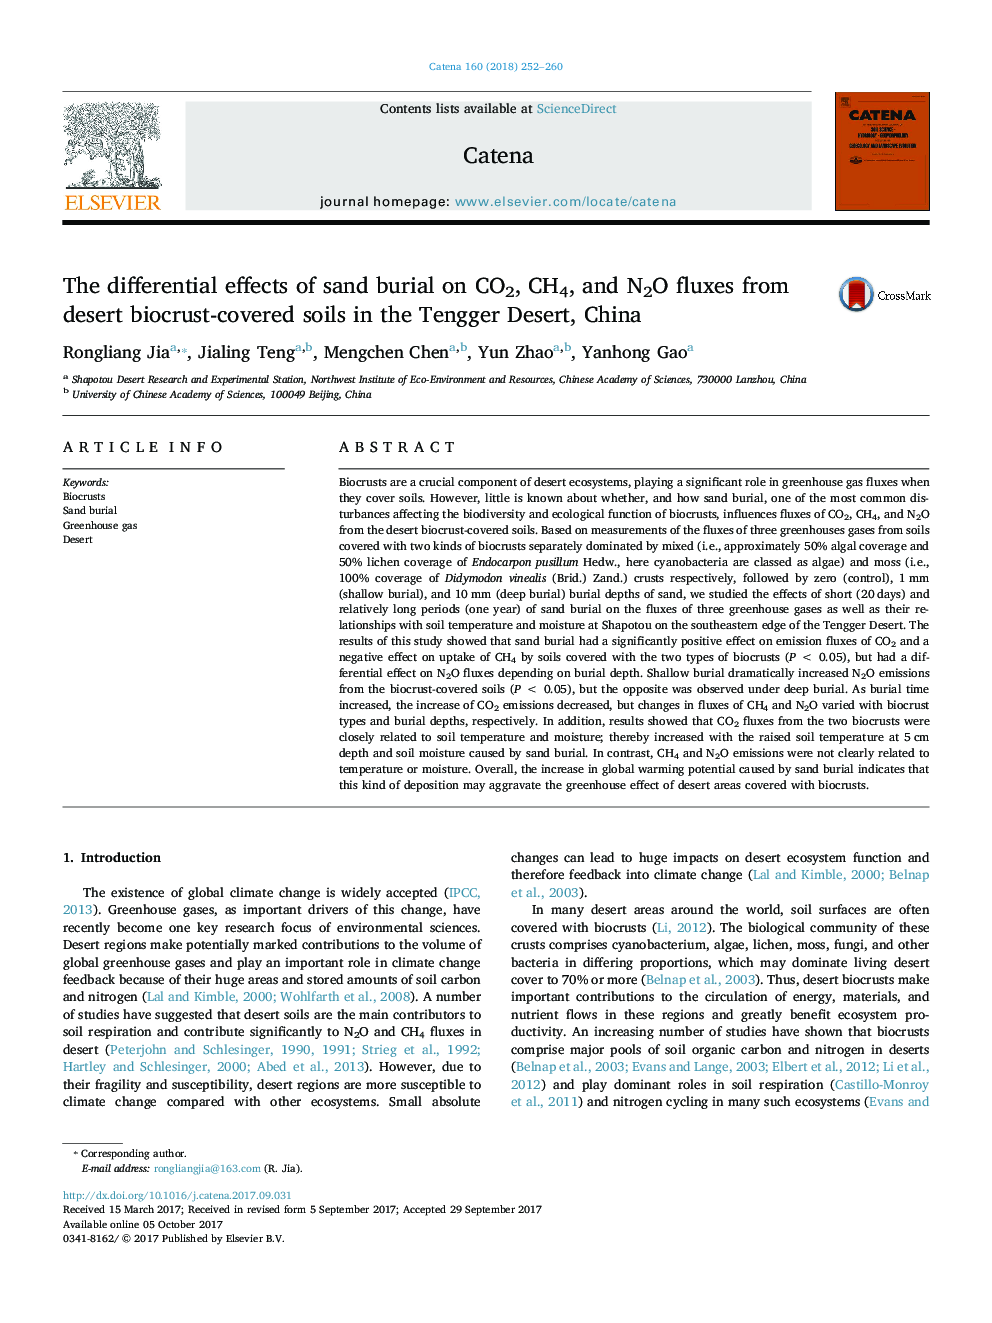 The differential effects of sand burial on CO2, CH4, and N2O fluxes from desert biocrust-covered soils in the Tengger Desert, China